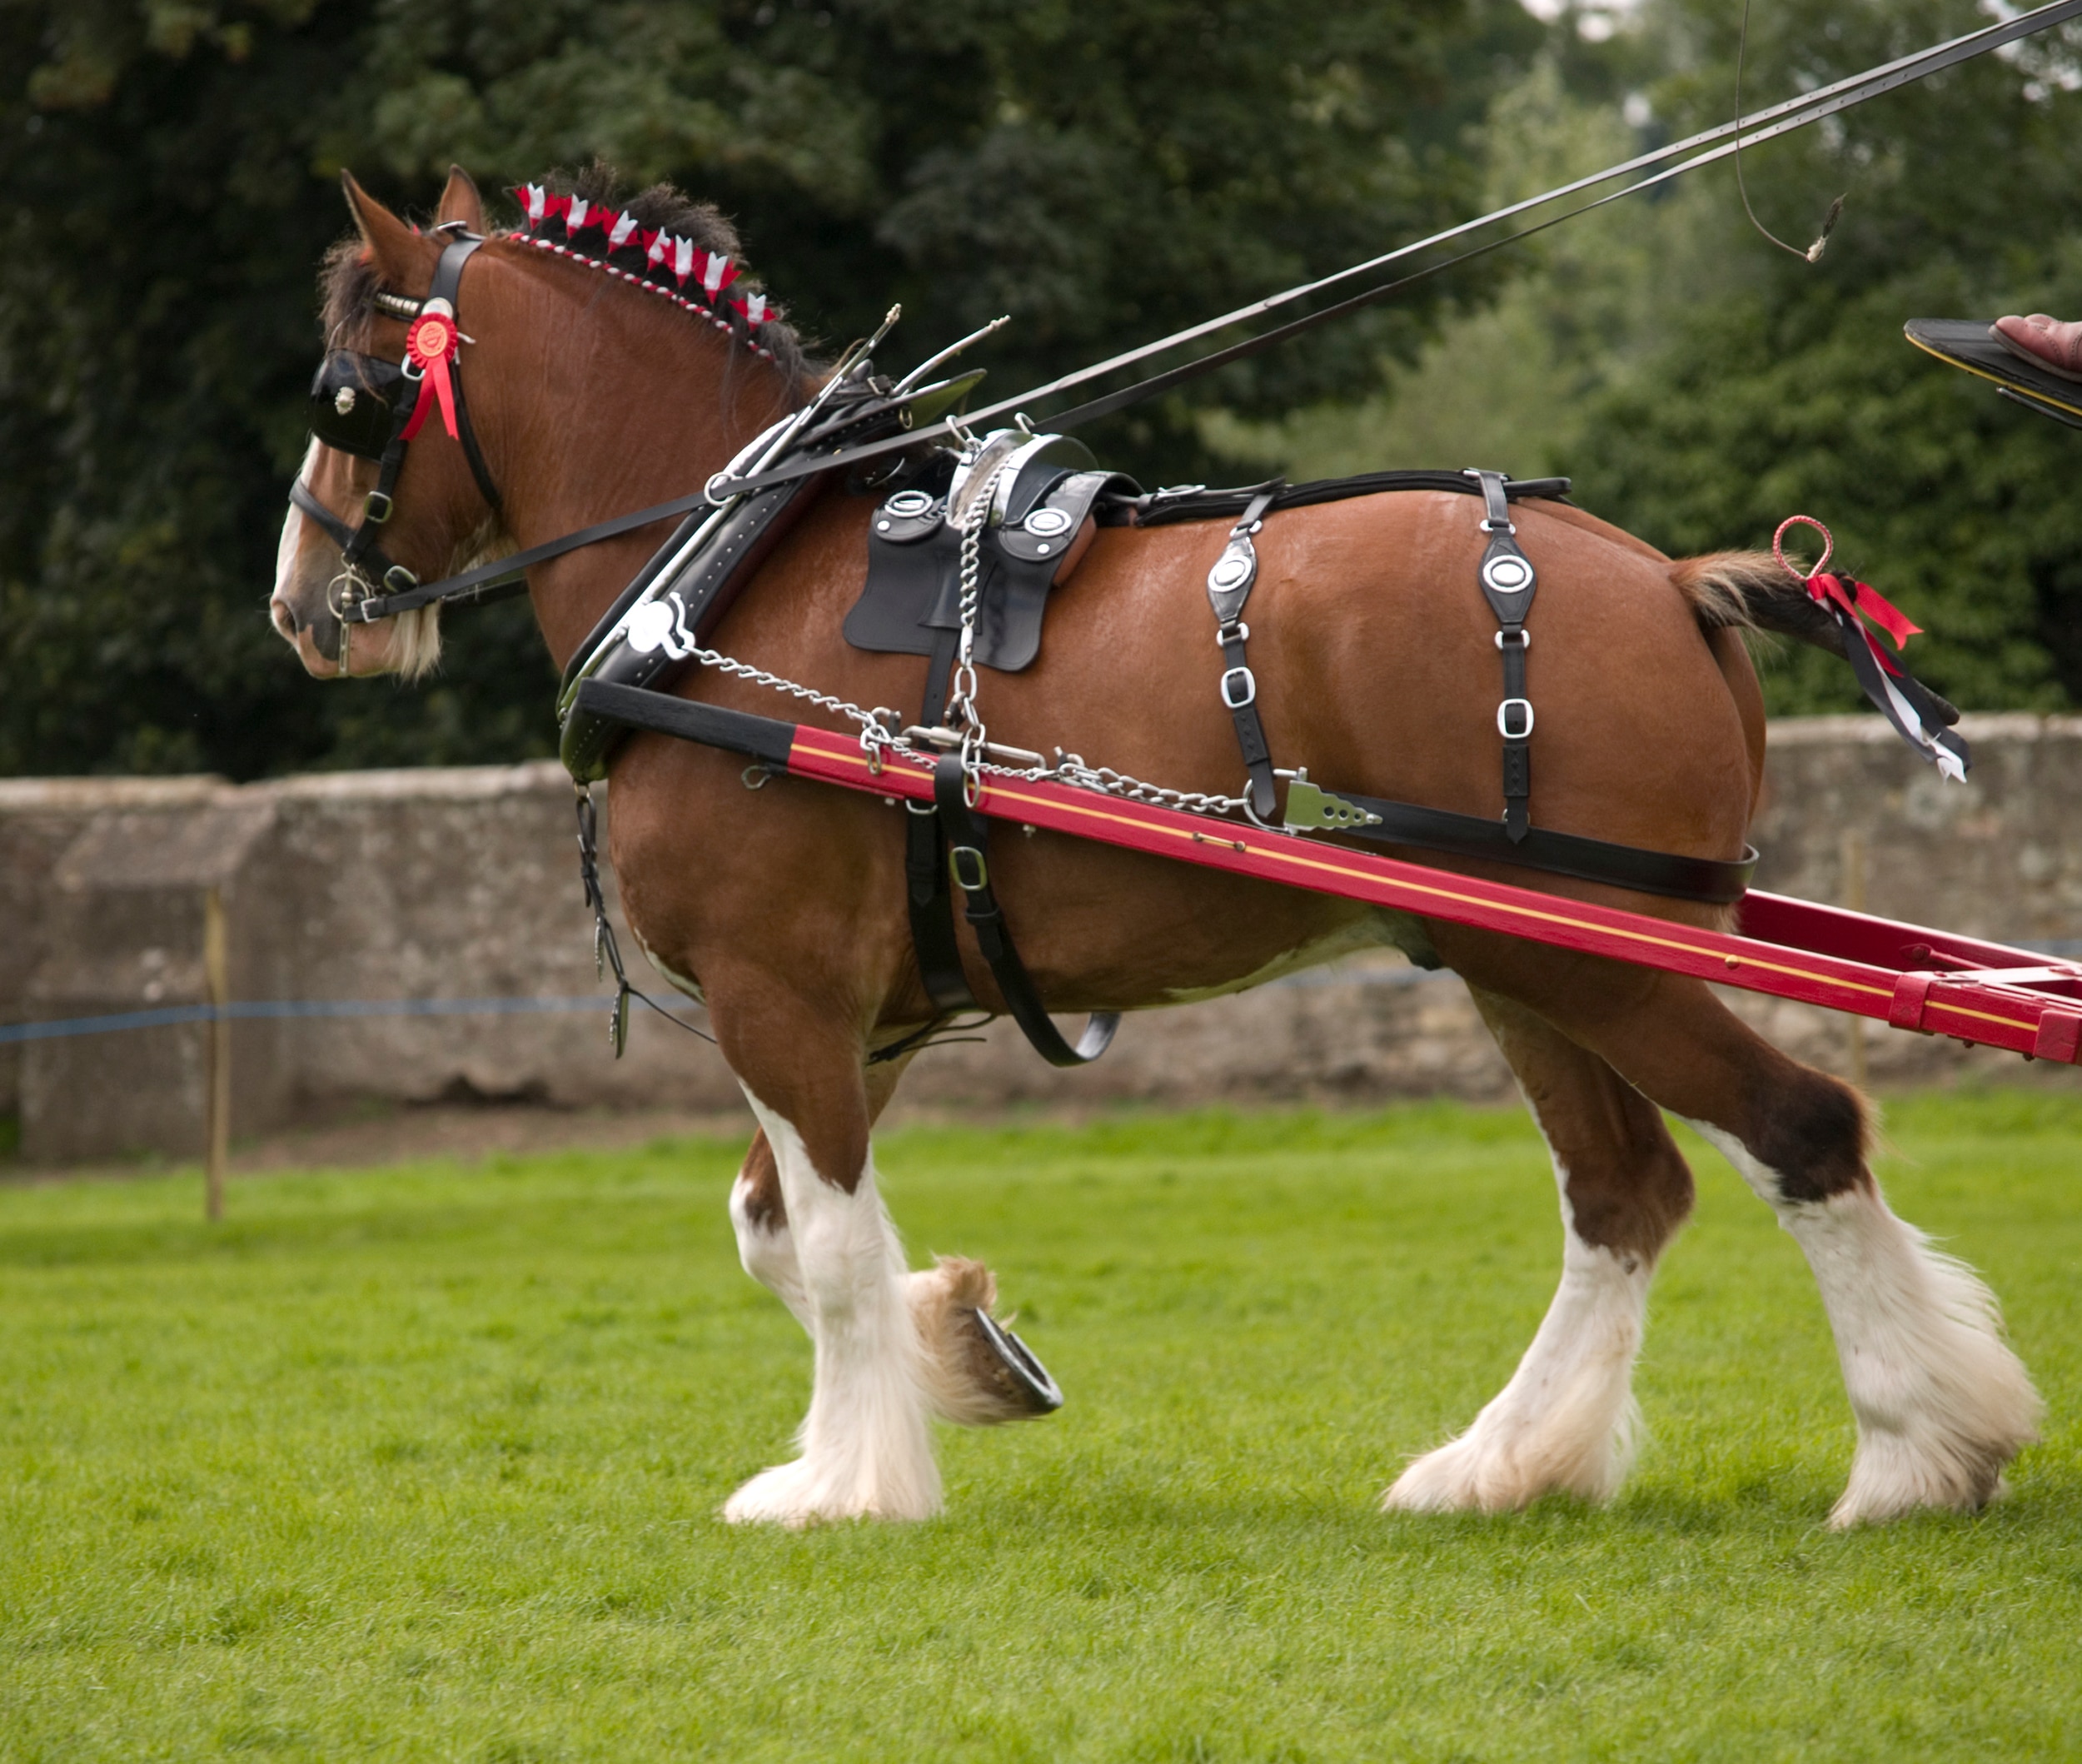 Clydesdale driven in harness